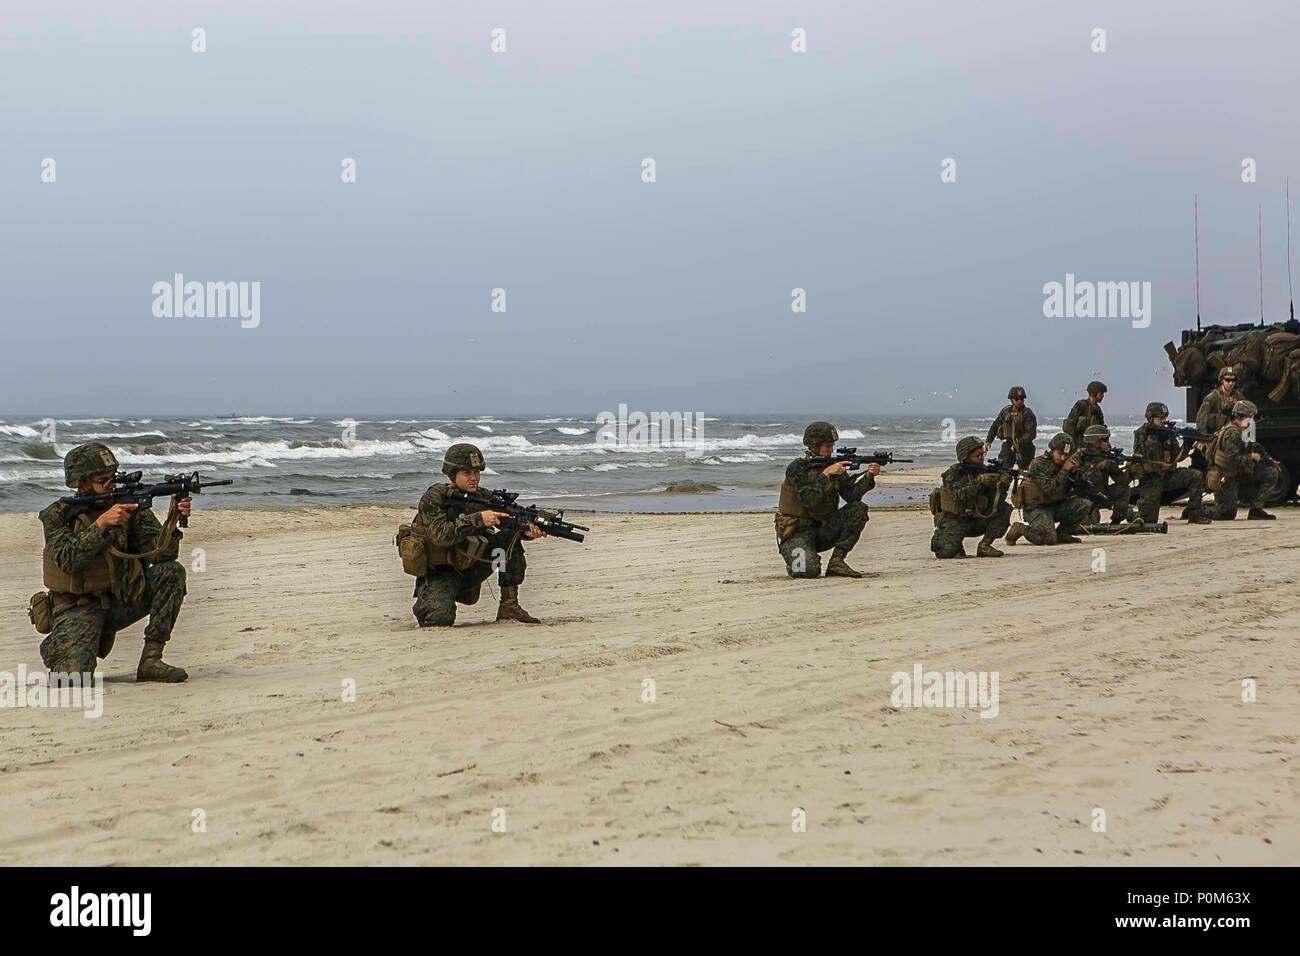 NEMERSITA, Lithuania (June 4, 2018) U.S. Marines assigned to Fox Company, Battalion Landing Team, 2nd Battalion, 6th Marine Regiment, 26th Marine Expeditionary Unit, execute a multilateral amphibious landing during exercise Baltic Operations (BALTOPS) 2018 in Nemersita, Lithuania, June 4. BALTOPS is the premier annual maritime-focused exercise in the Baltic region and one of the largest exercises in Northern Europe enhancing flexibility and interoperability among allied and partner nations. (Marine Corps photo by Staff Sgt. Dengrier M. Baez/Released) Stock Photo